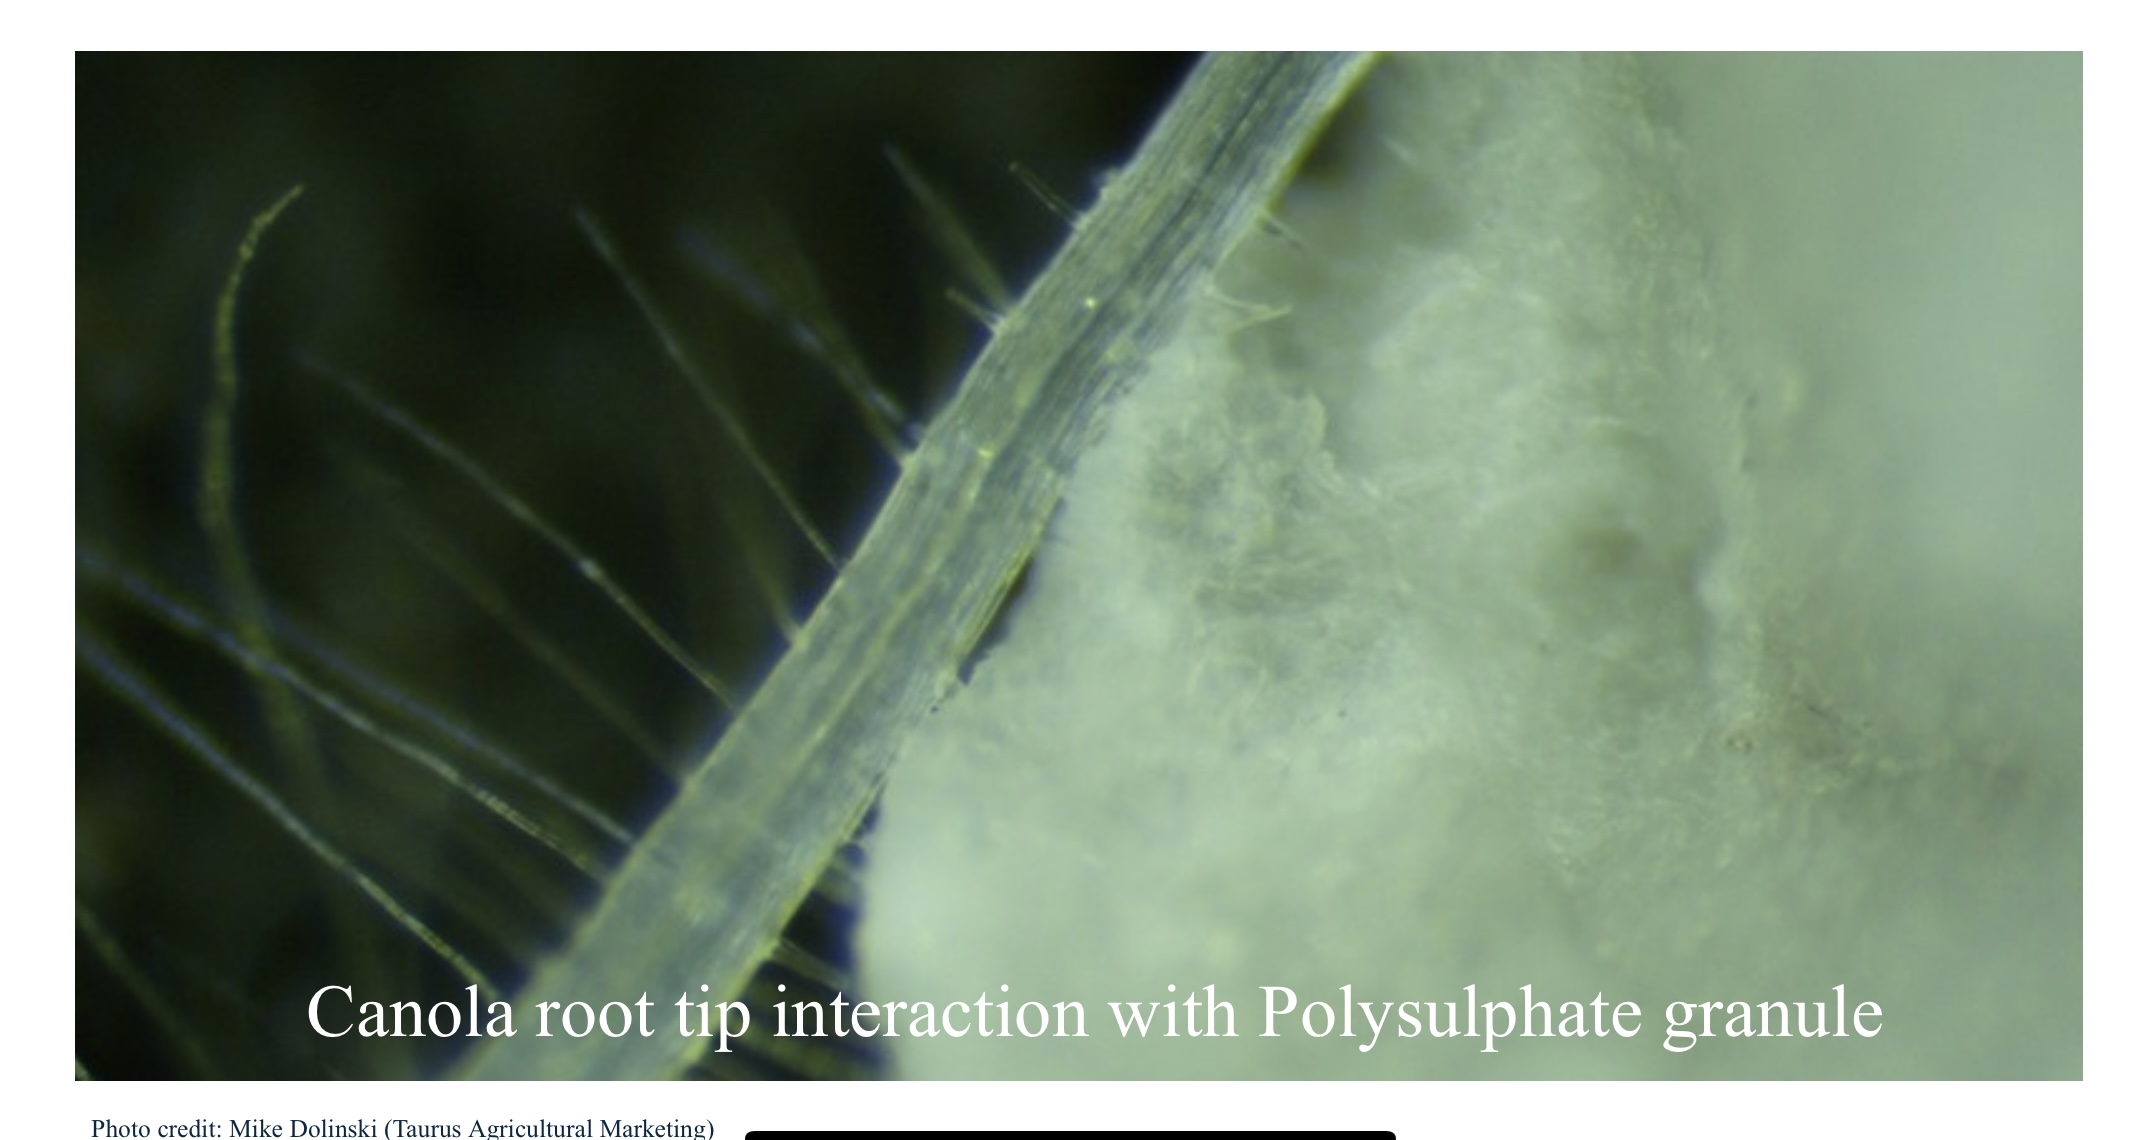 canola root touching a polysulphate granule